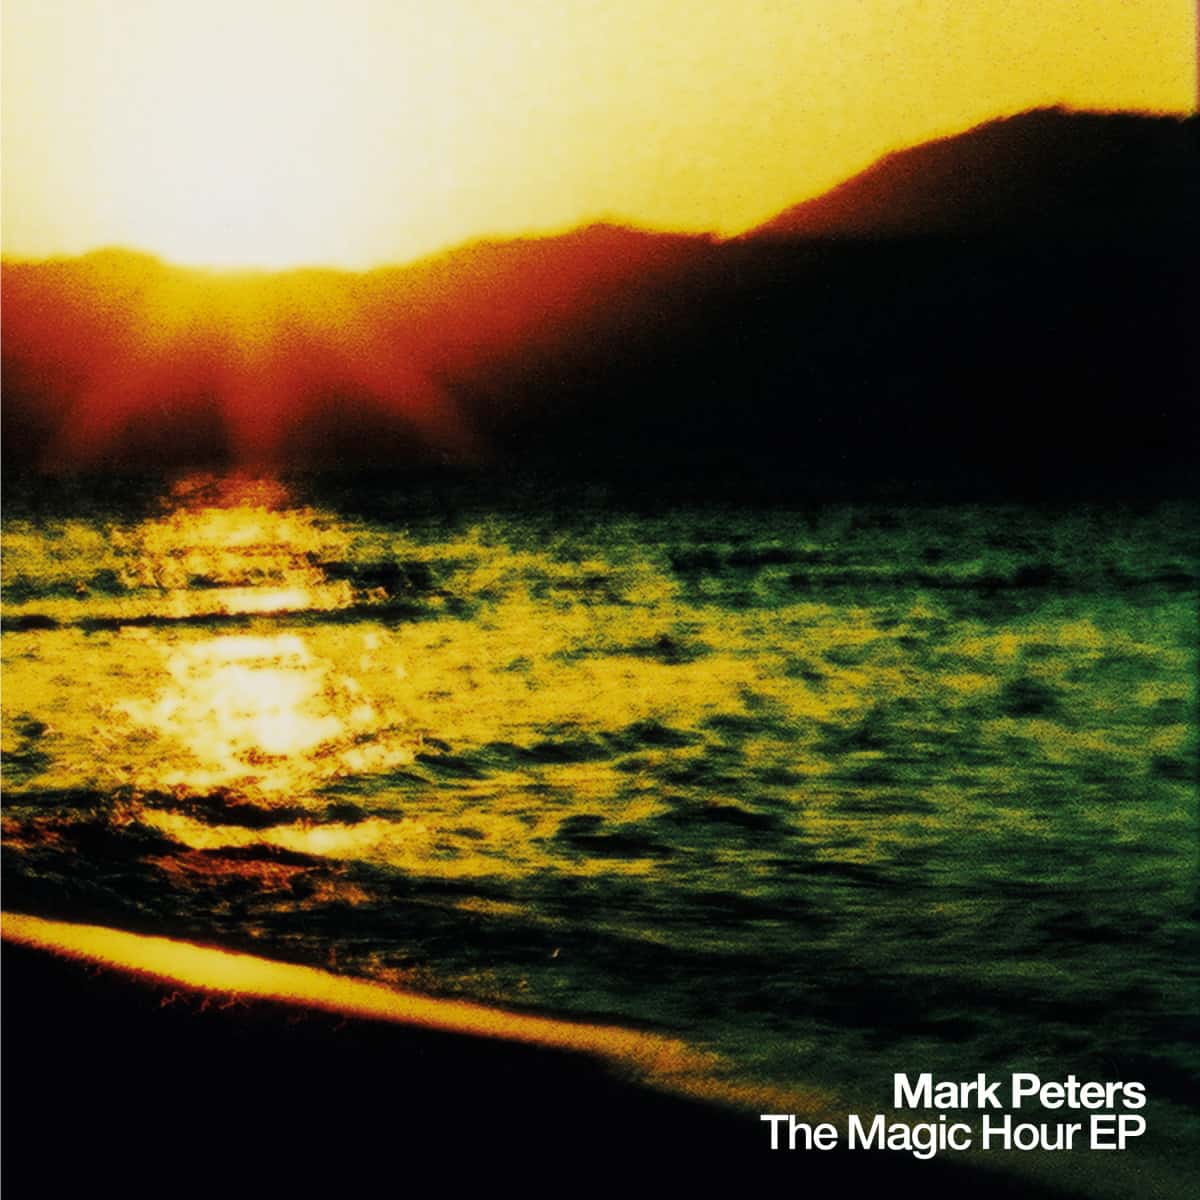 JUST IN: 'The Magic Hour EP' by Mark Peters Complete with two originals and remixes by Richard Norris and Dawn Chorus And The Infallible Sea, @talktopeters releases a new EP through @soniccathedral. normanrecords.com/records/196225…